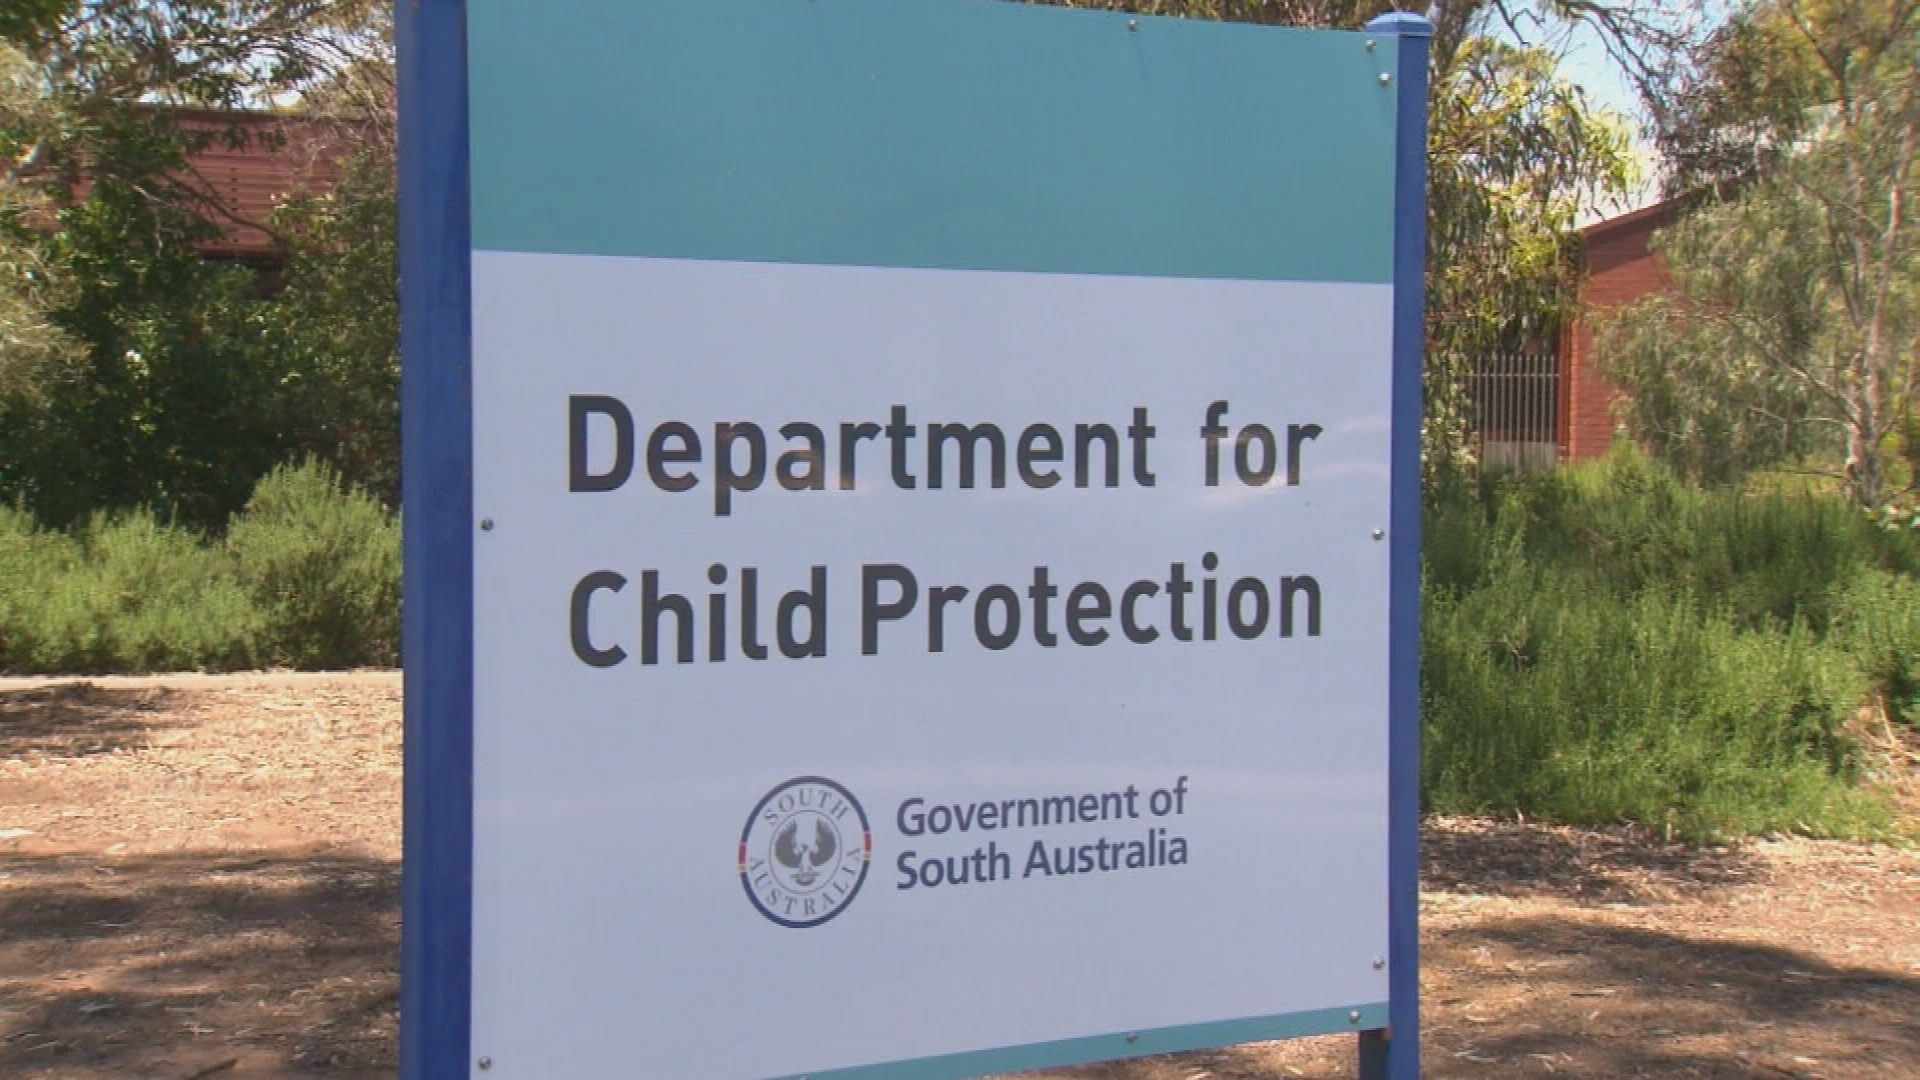 The Child Protection Department's interim CEO Erma Ranieri has acknowledged the "quality of practice in the case was not to a standard expected by the community..."